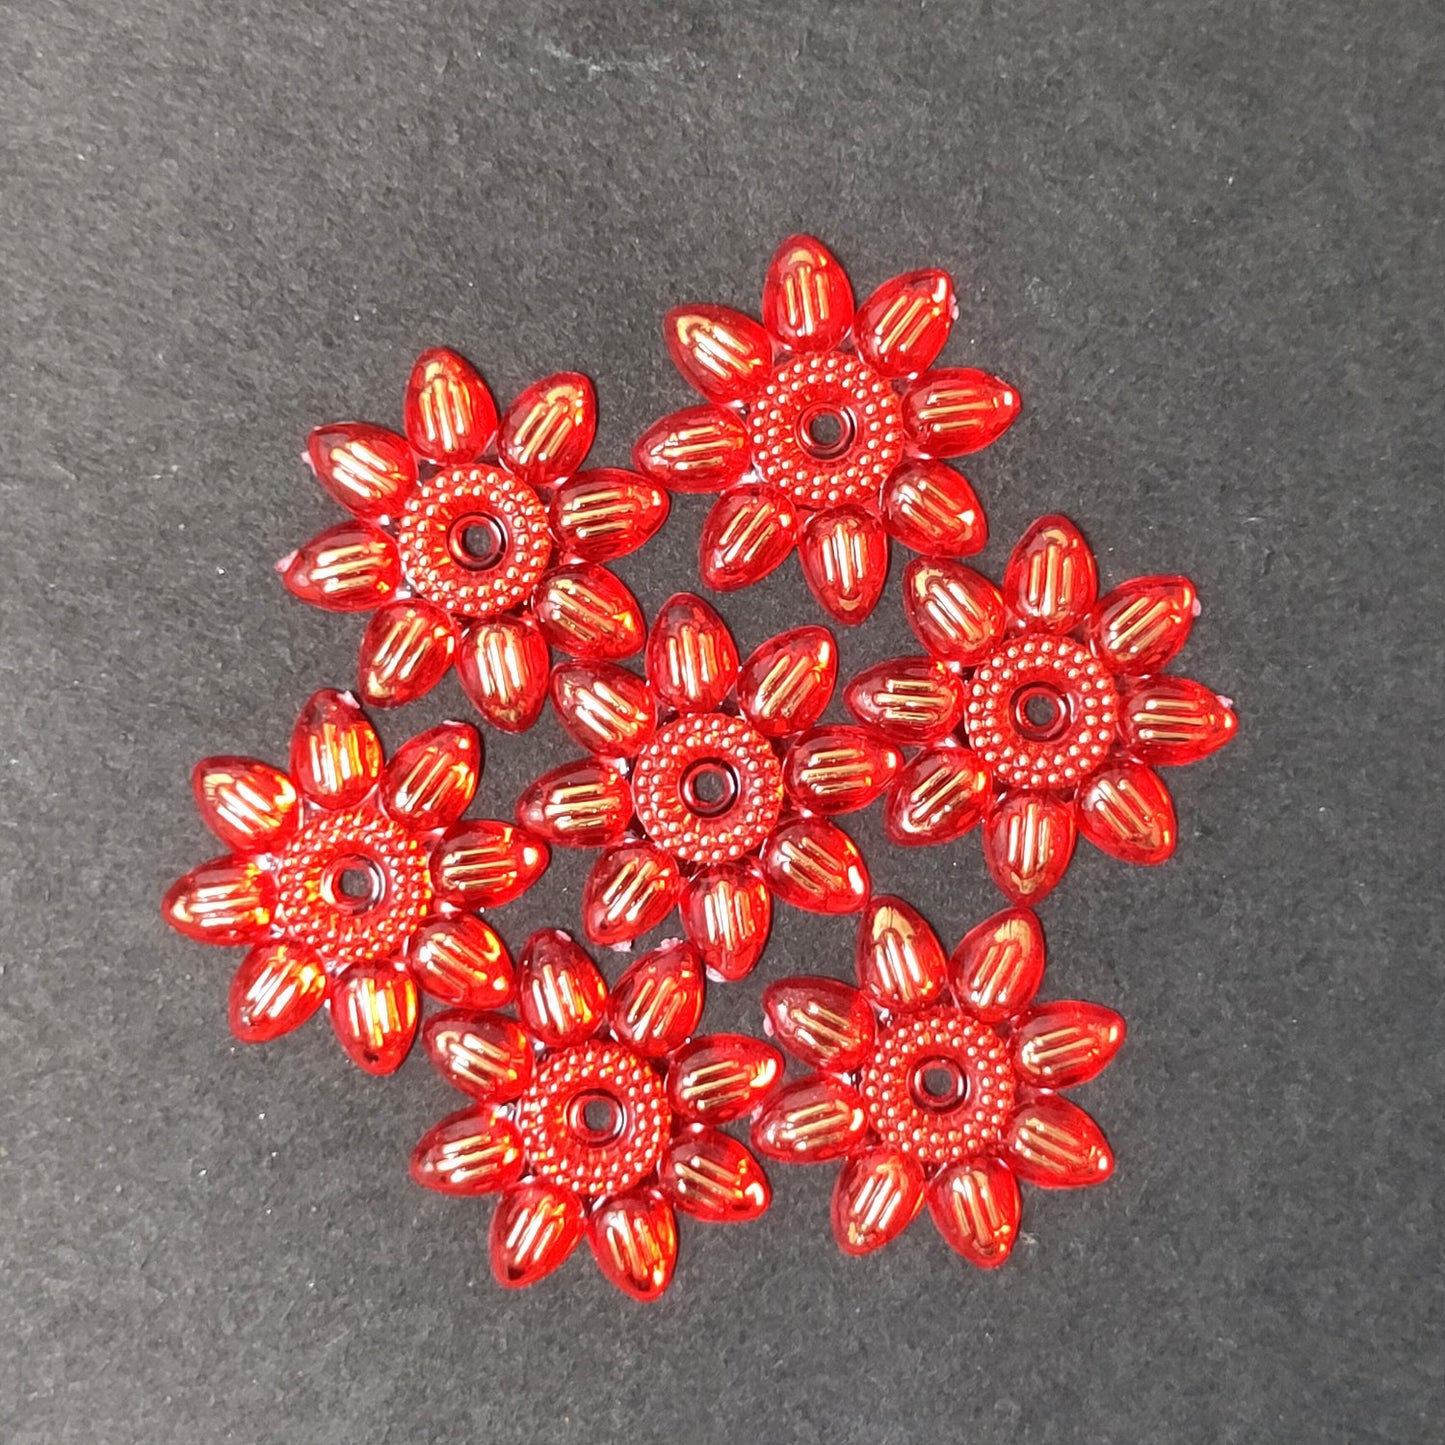 25 mm Plastic Floral Beads for Jewellery Making and Decoration (10 Beads) - 96-11